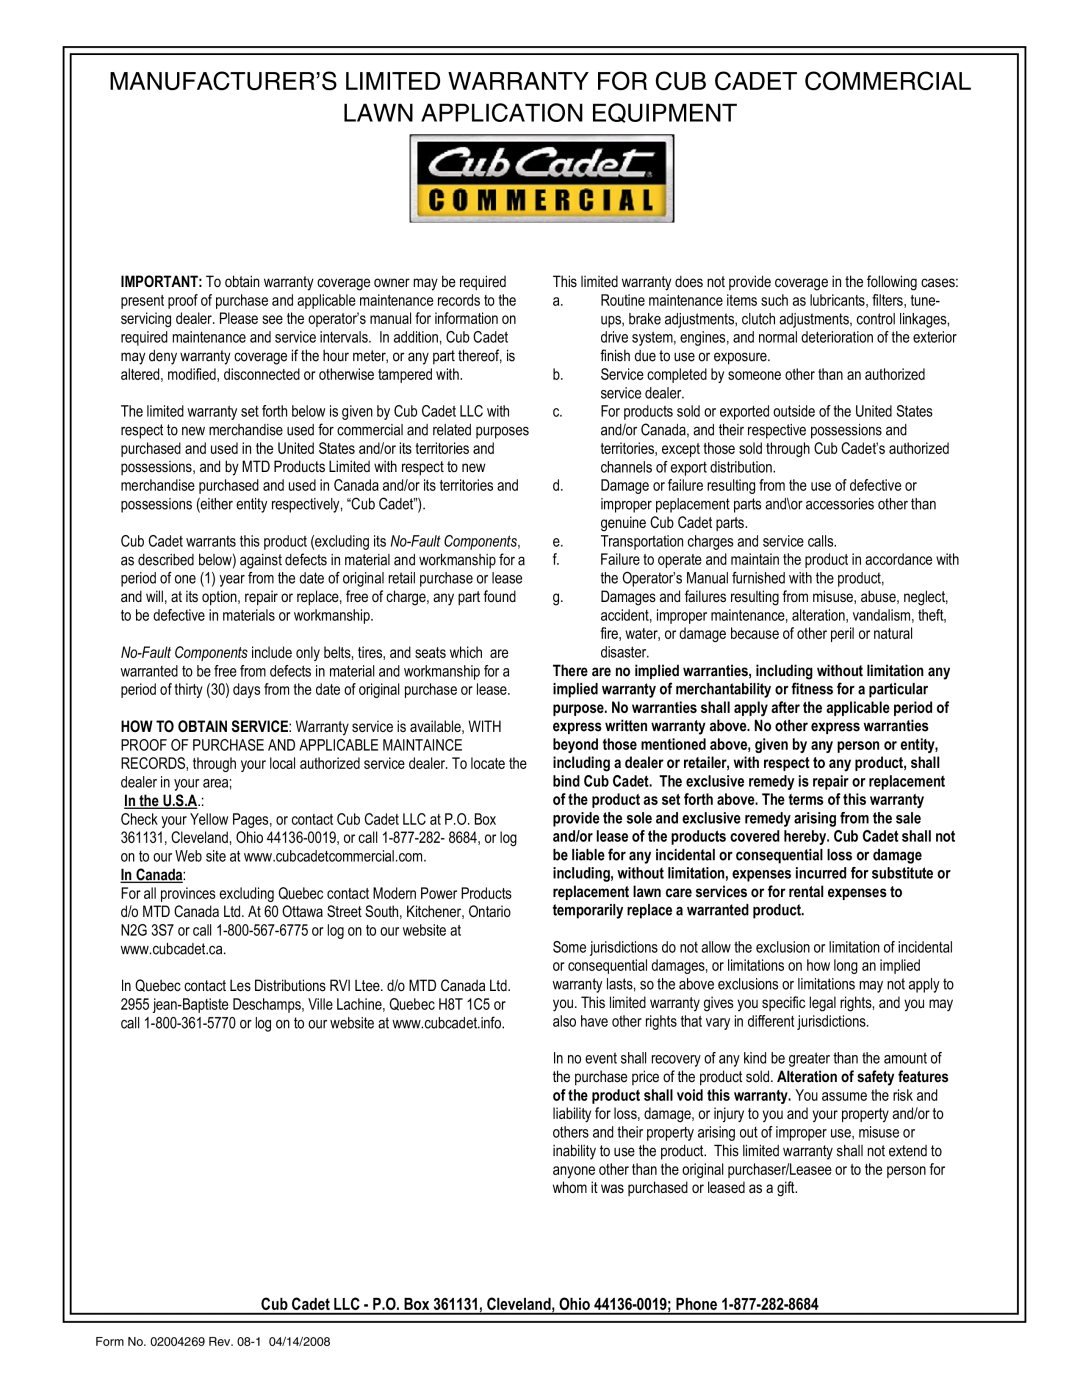 Cub Cadet 80 LB manual Manufacturer’S Limited Warranty For Cub Cadet Commercial, Lawn Application Equipment, In the U.S.A 